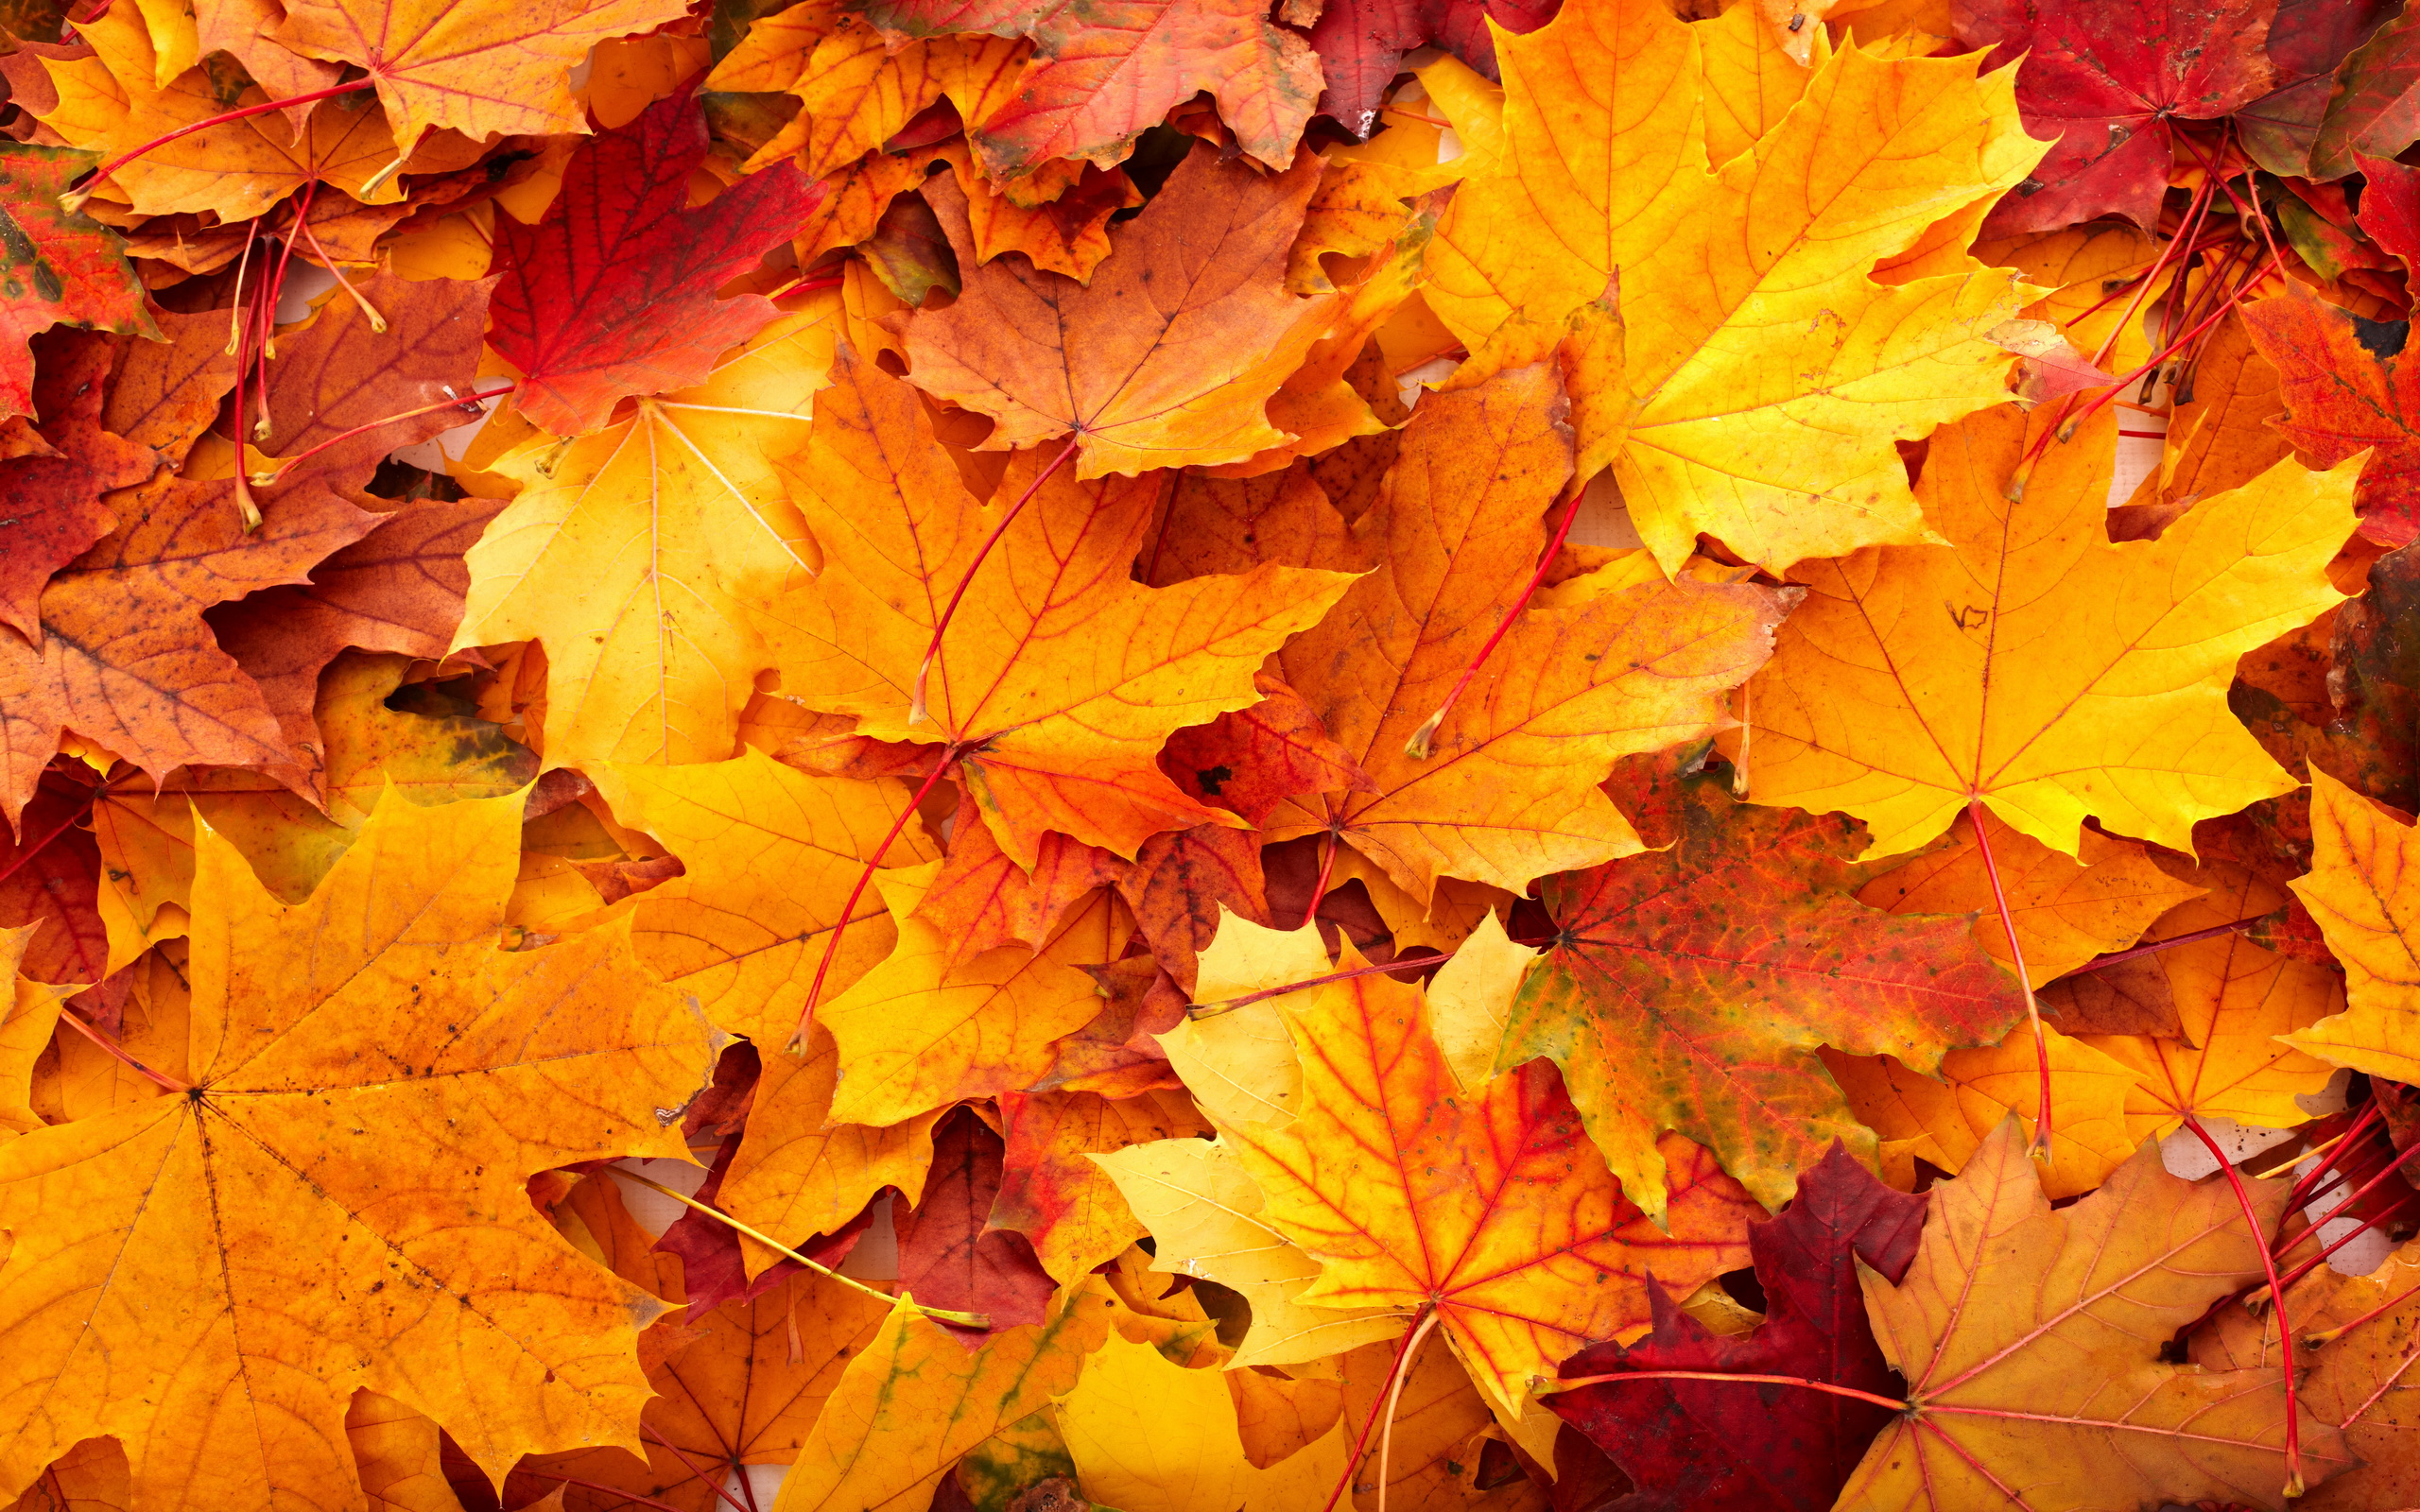 30 Most Beautiful Autumn Wallpapers Hd   Mixhd Wallpapers